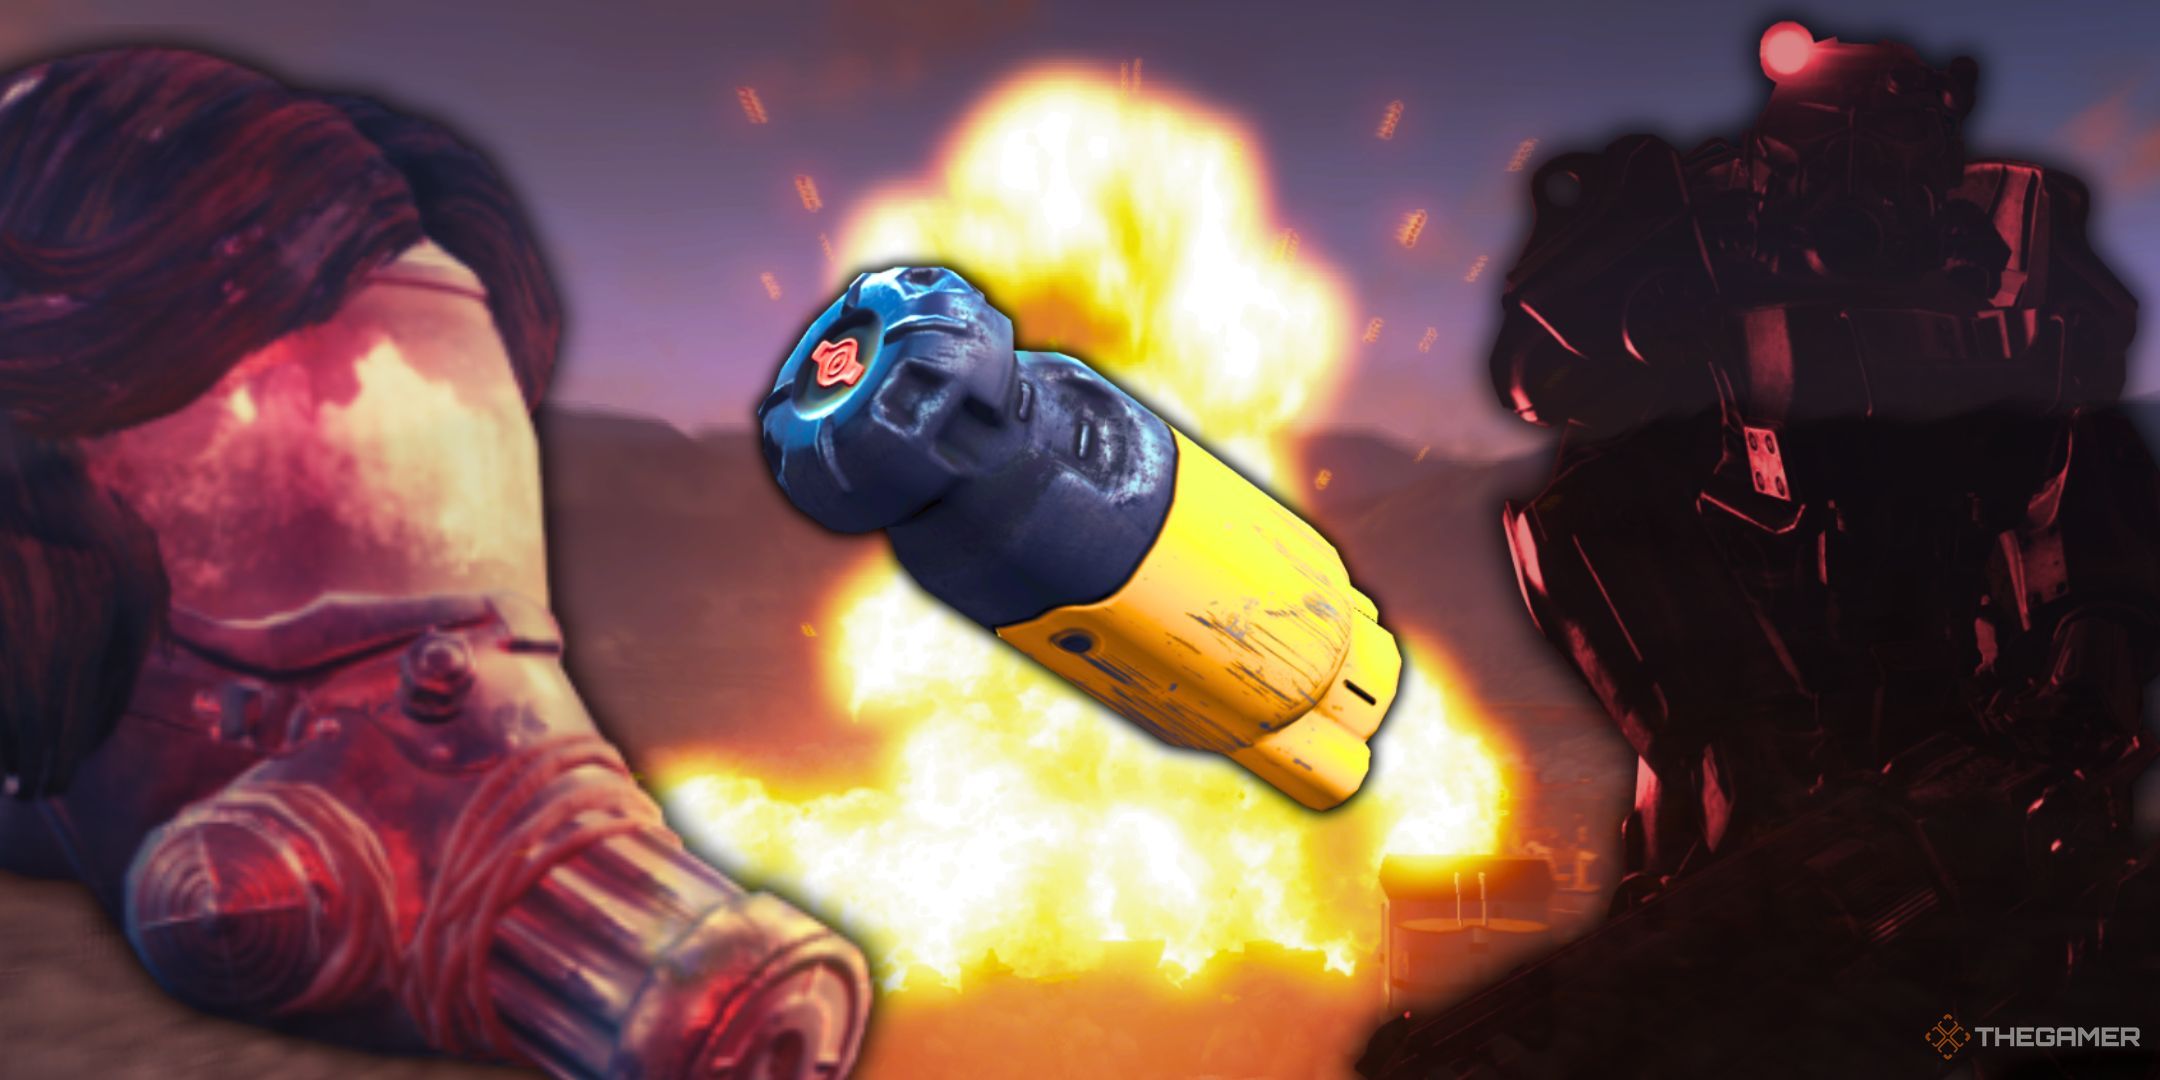 A large, fiery explosion seen in the background, with a yellow and dark metal fusion core, and semi-transparent, armored characters in the foreground.